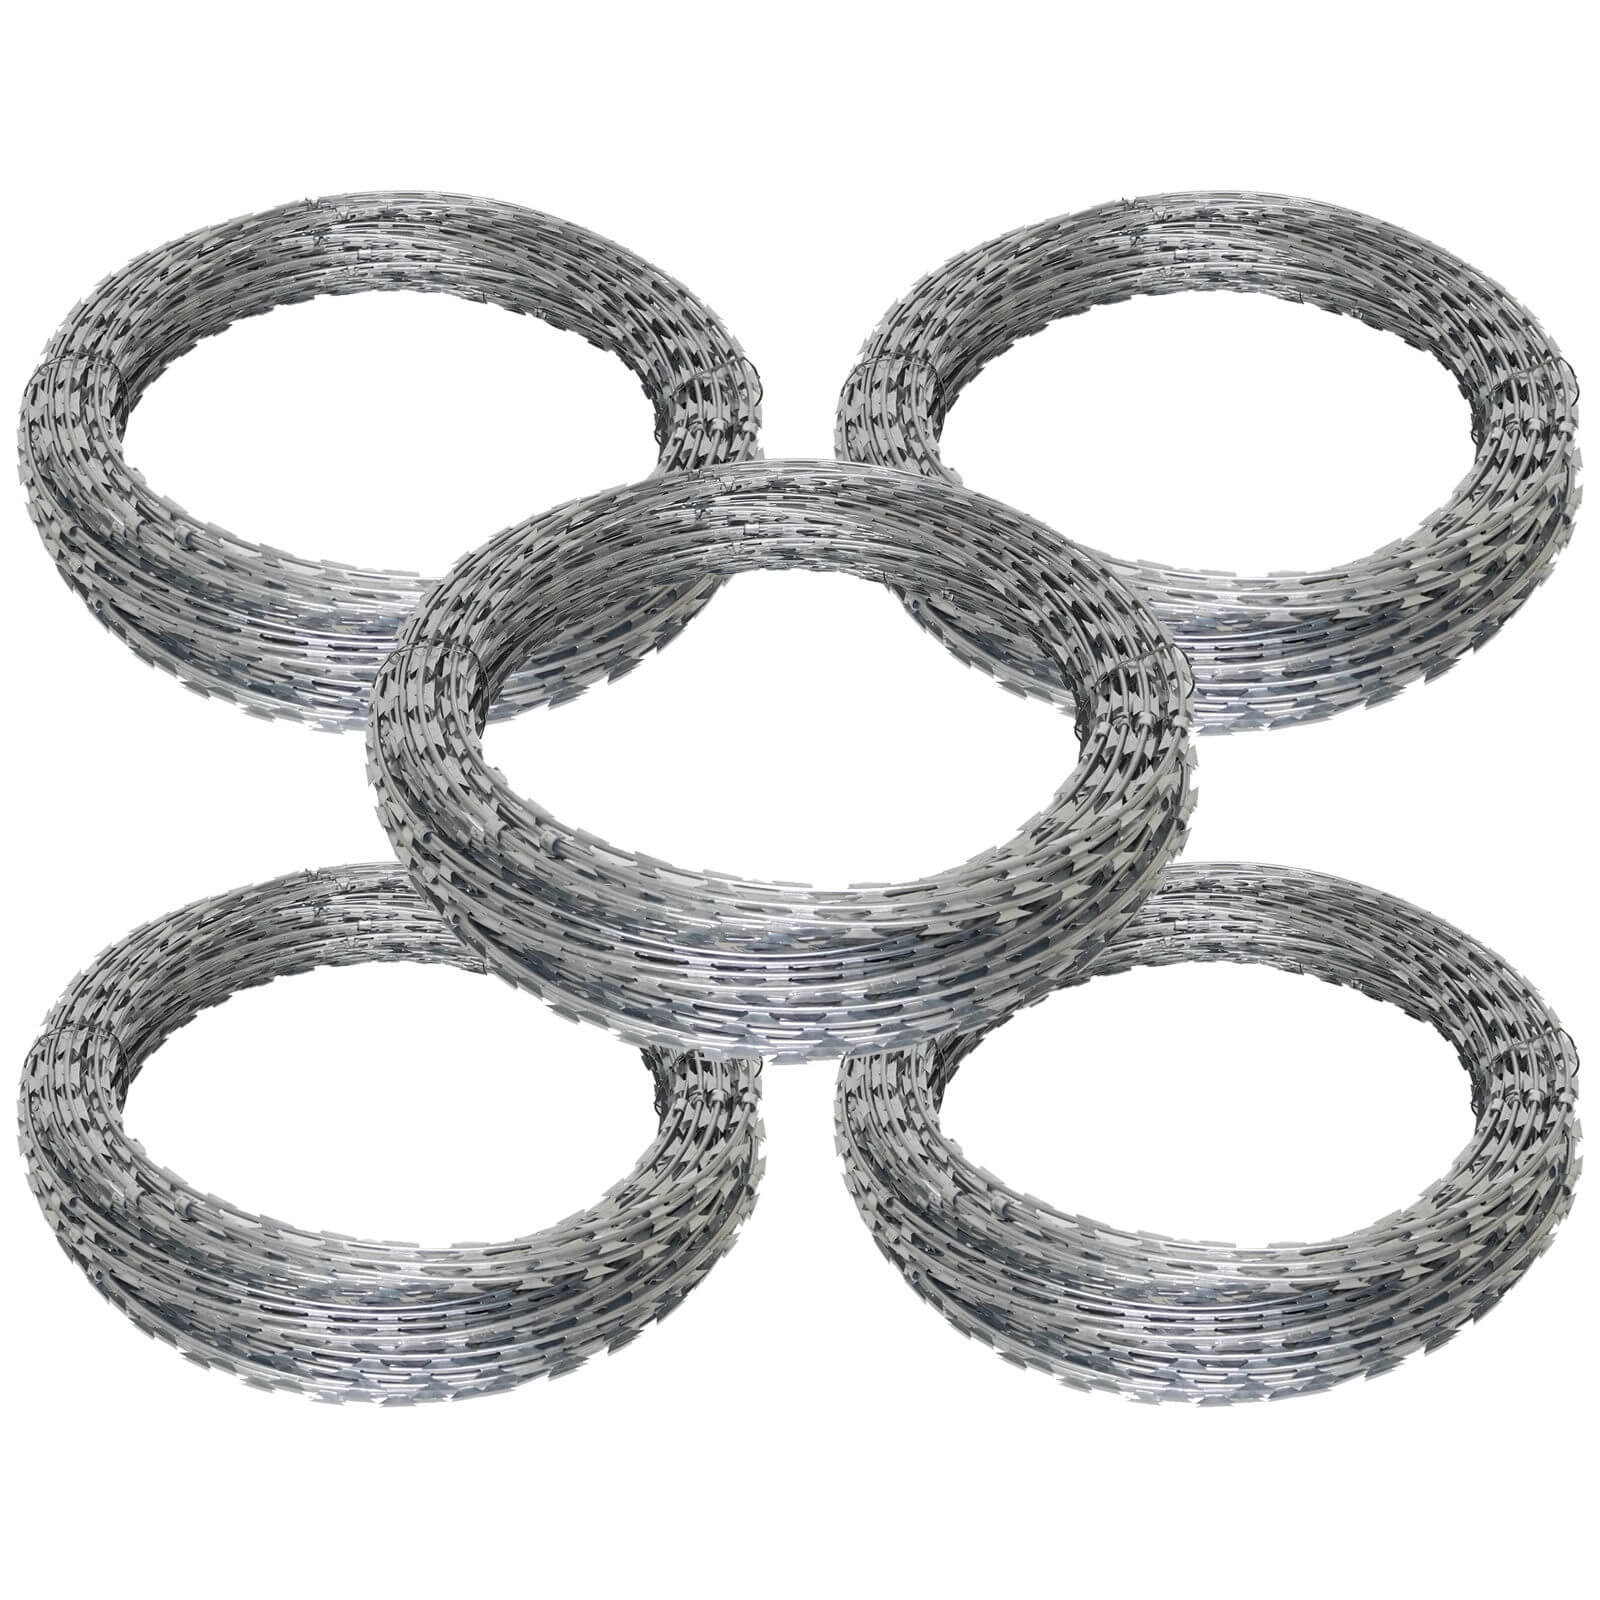 Razor wire - securing your property like nothing else can